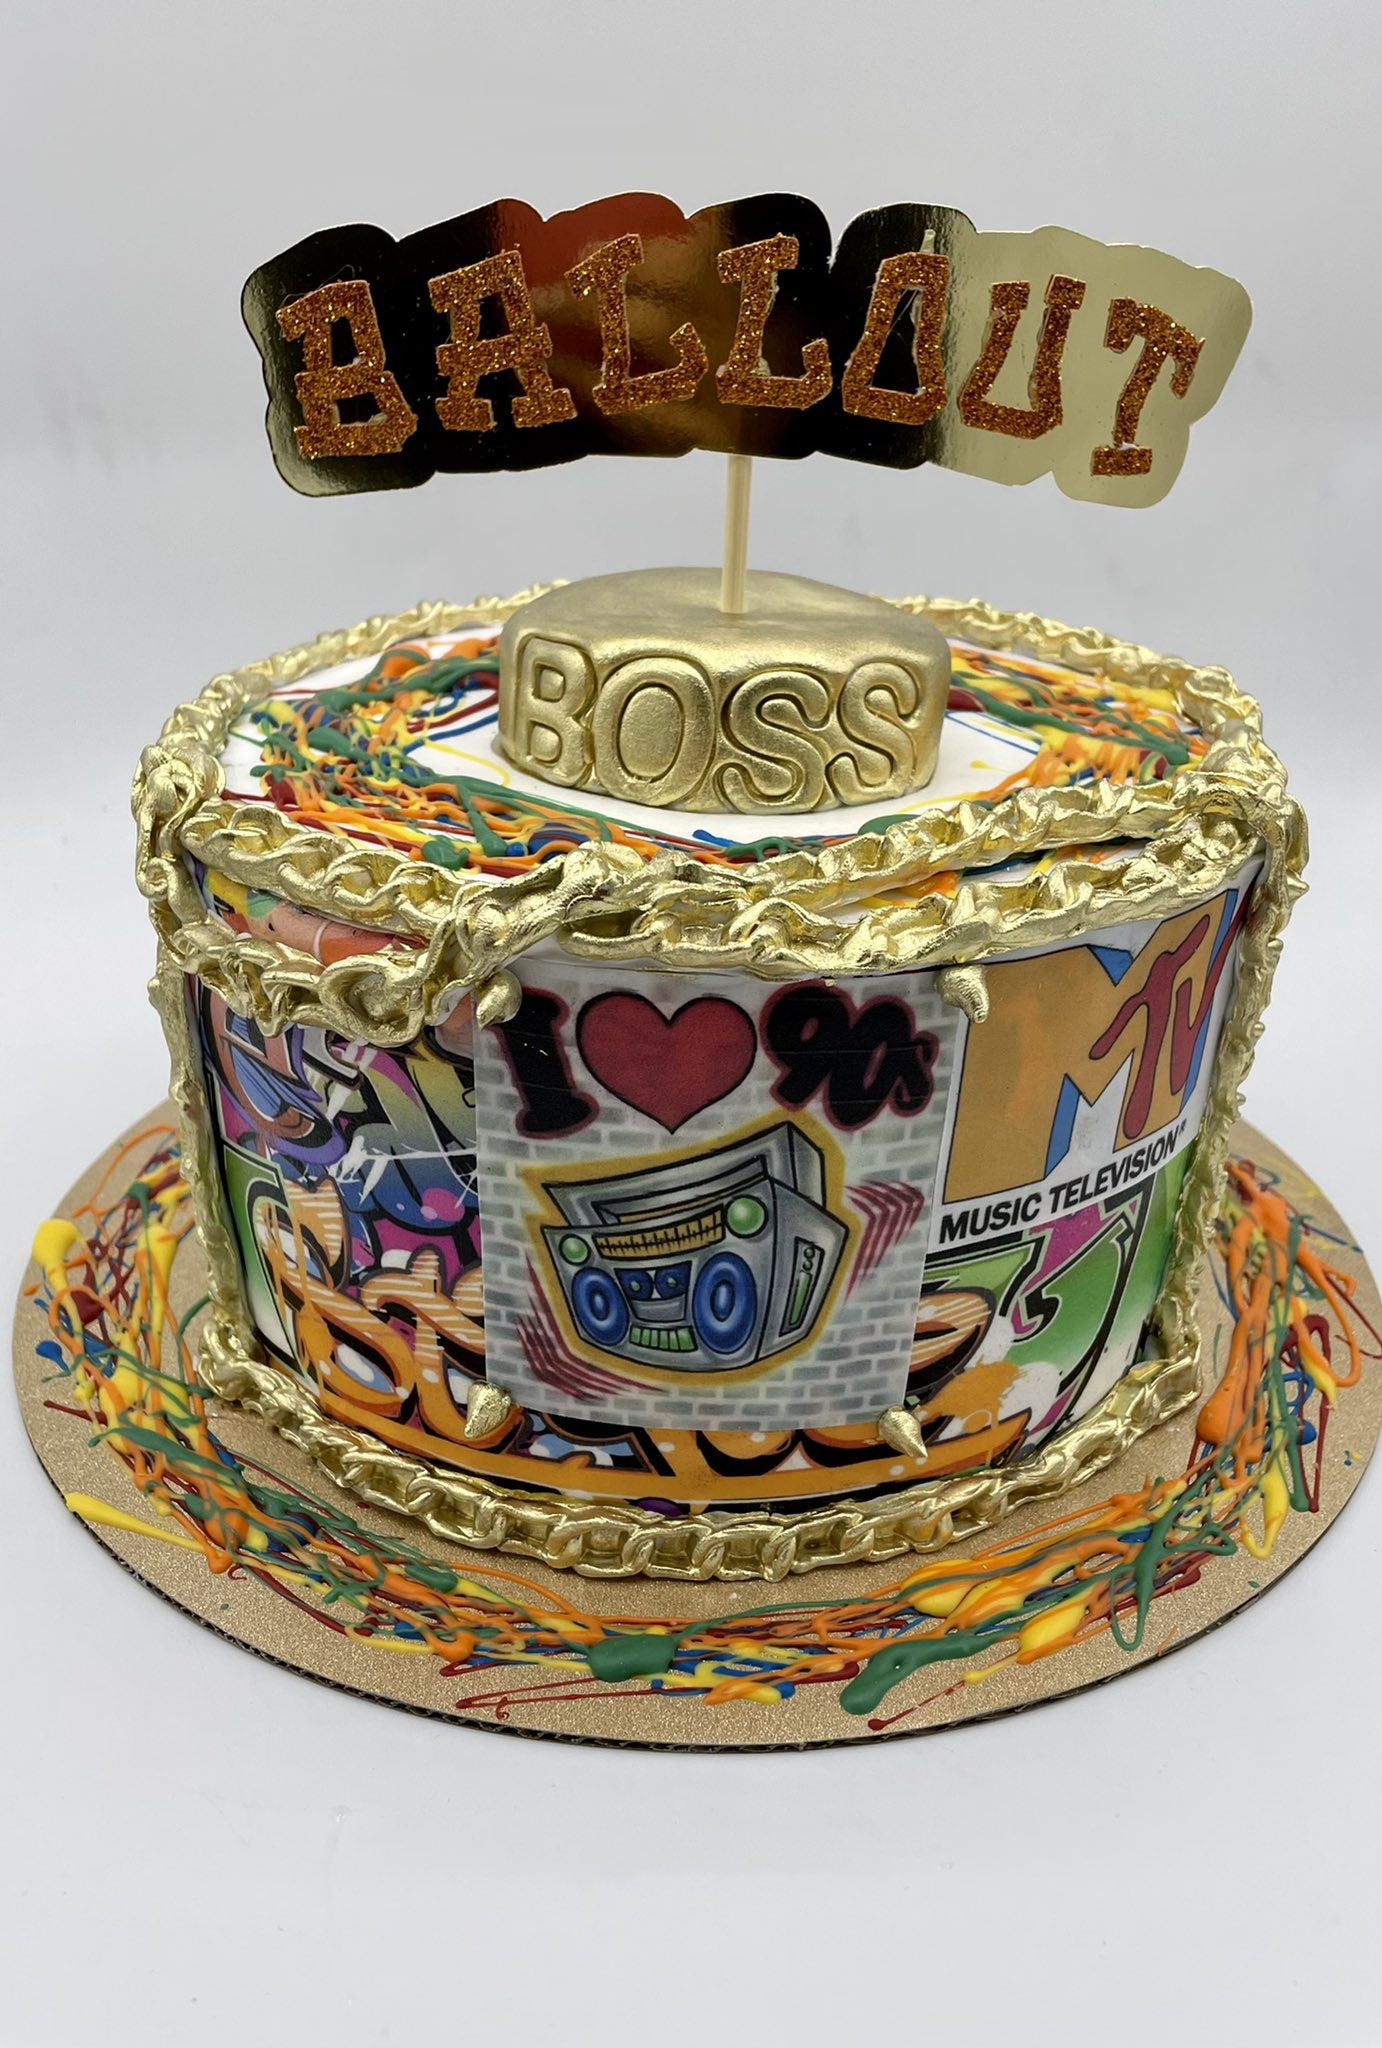 An R&B and hip-hop cake professionally made in the 90s